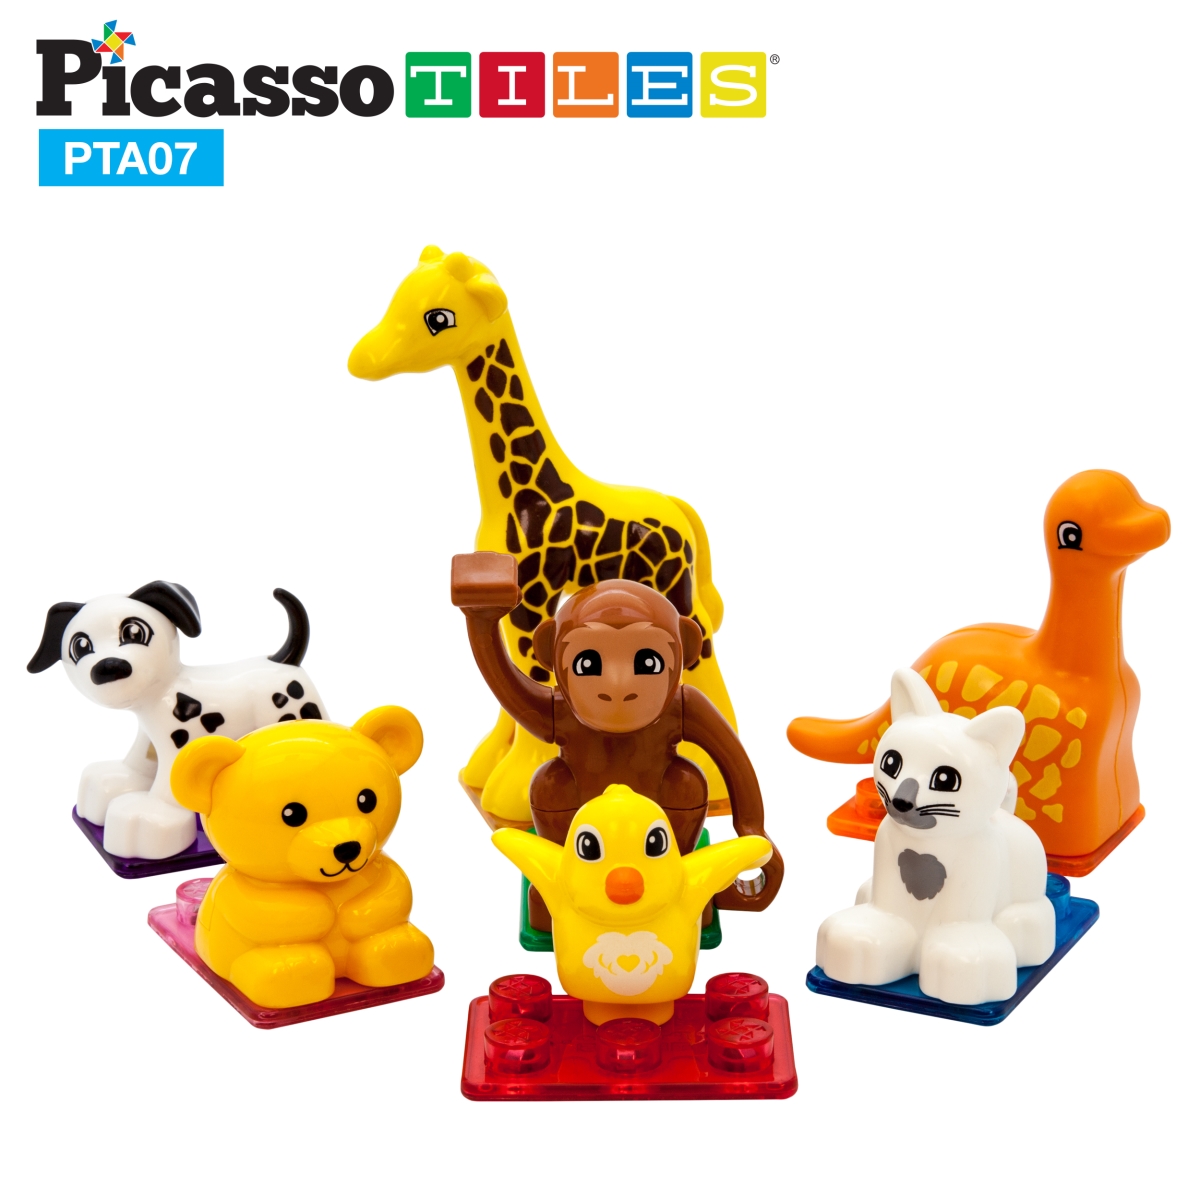 Picture of Picasso Tiles PTA07 Animal Character Figures Toys